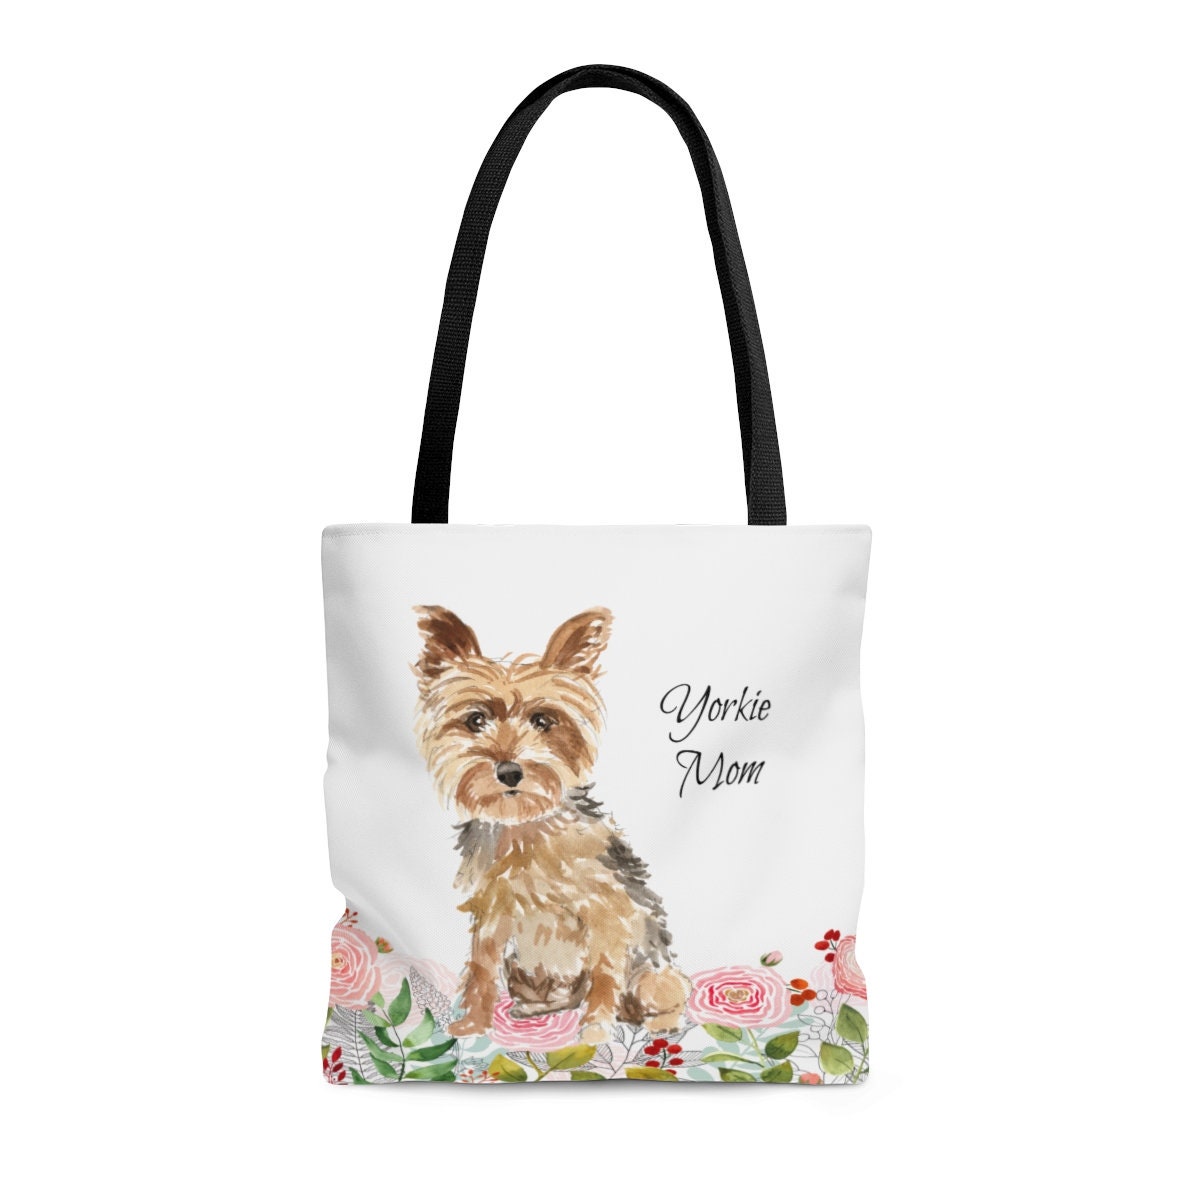 Cotton tote shopping bag for Yorkshire Terrier dog owners lovers gift idea 